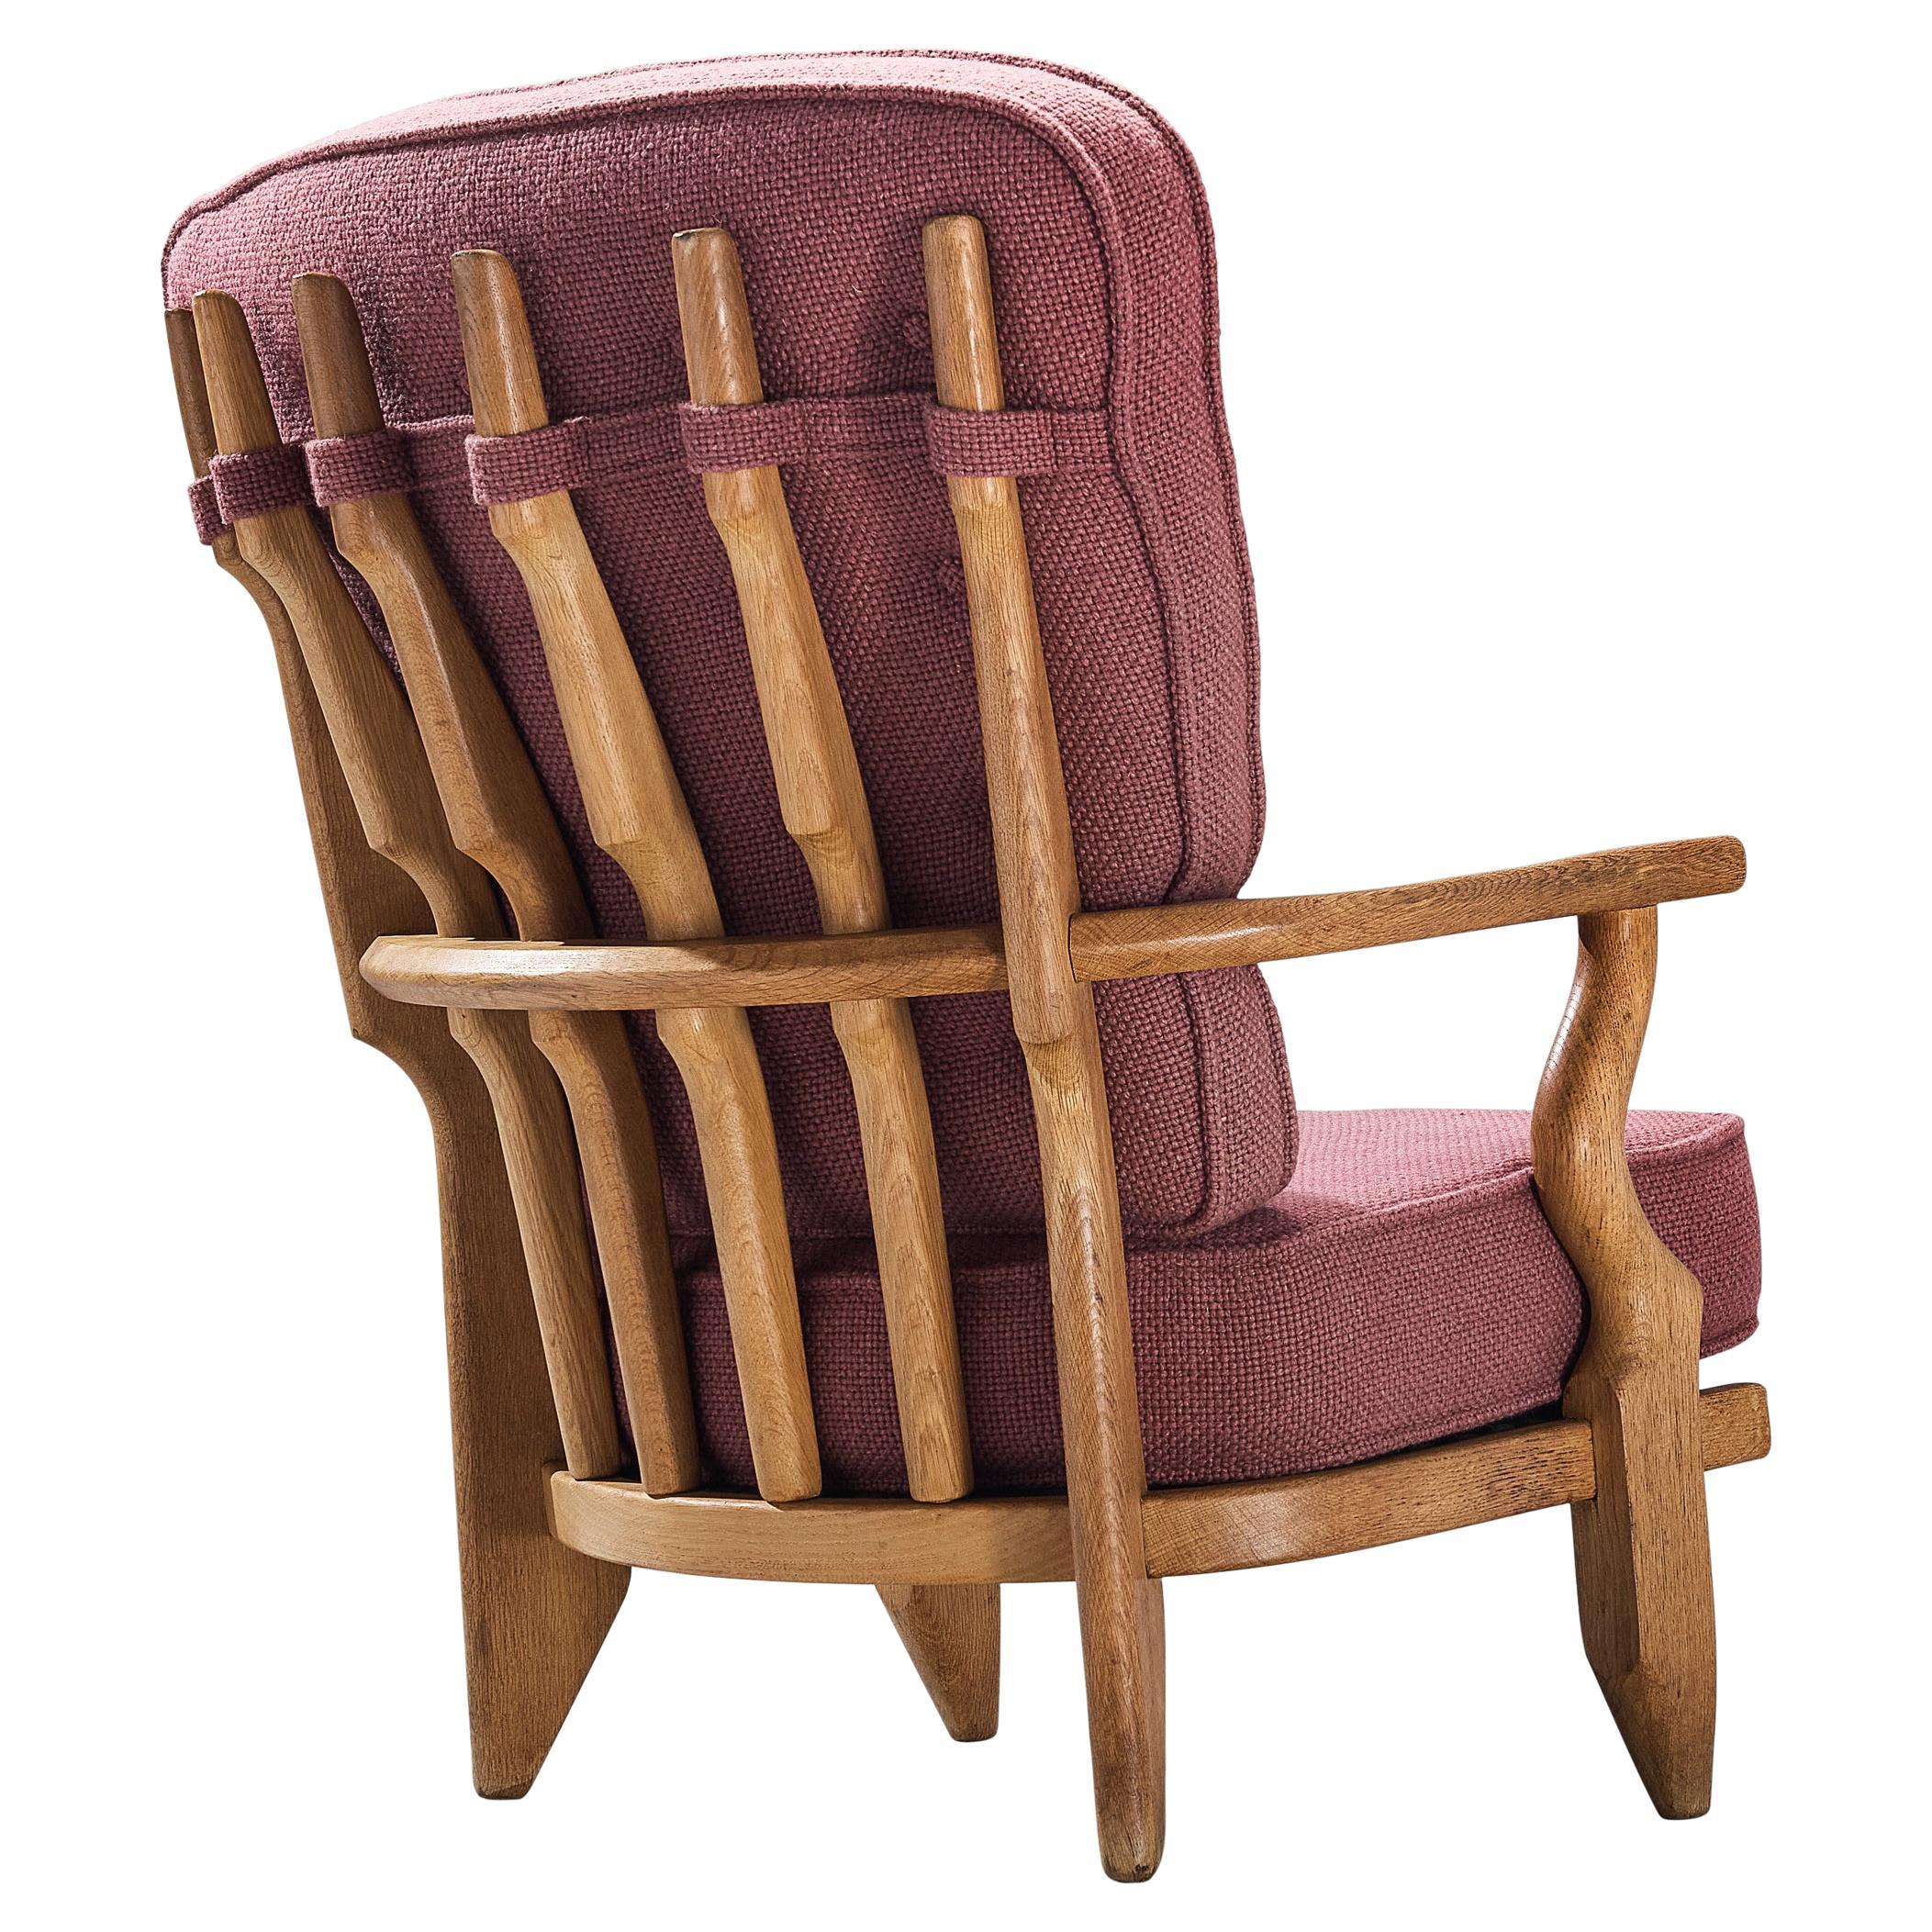 Guillerme & Chambron 'Mid Repos' Lounge Chair in Oak and Pink Upholstery